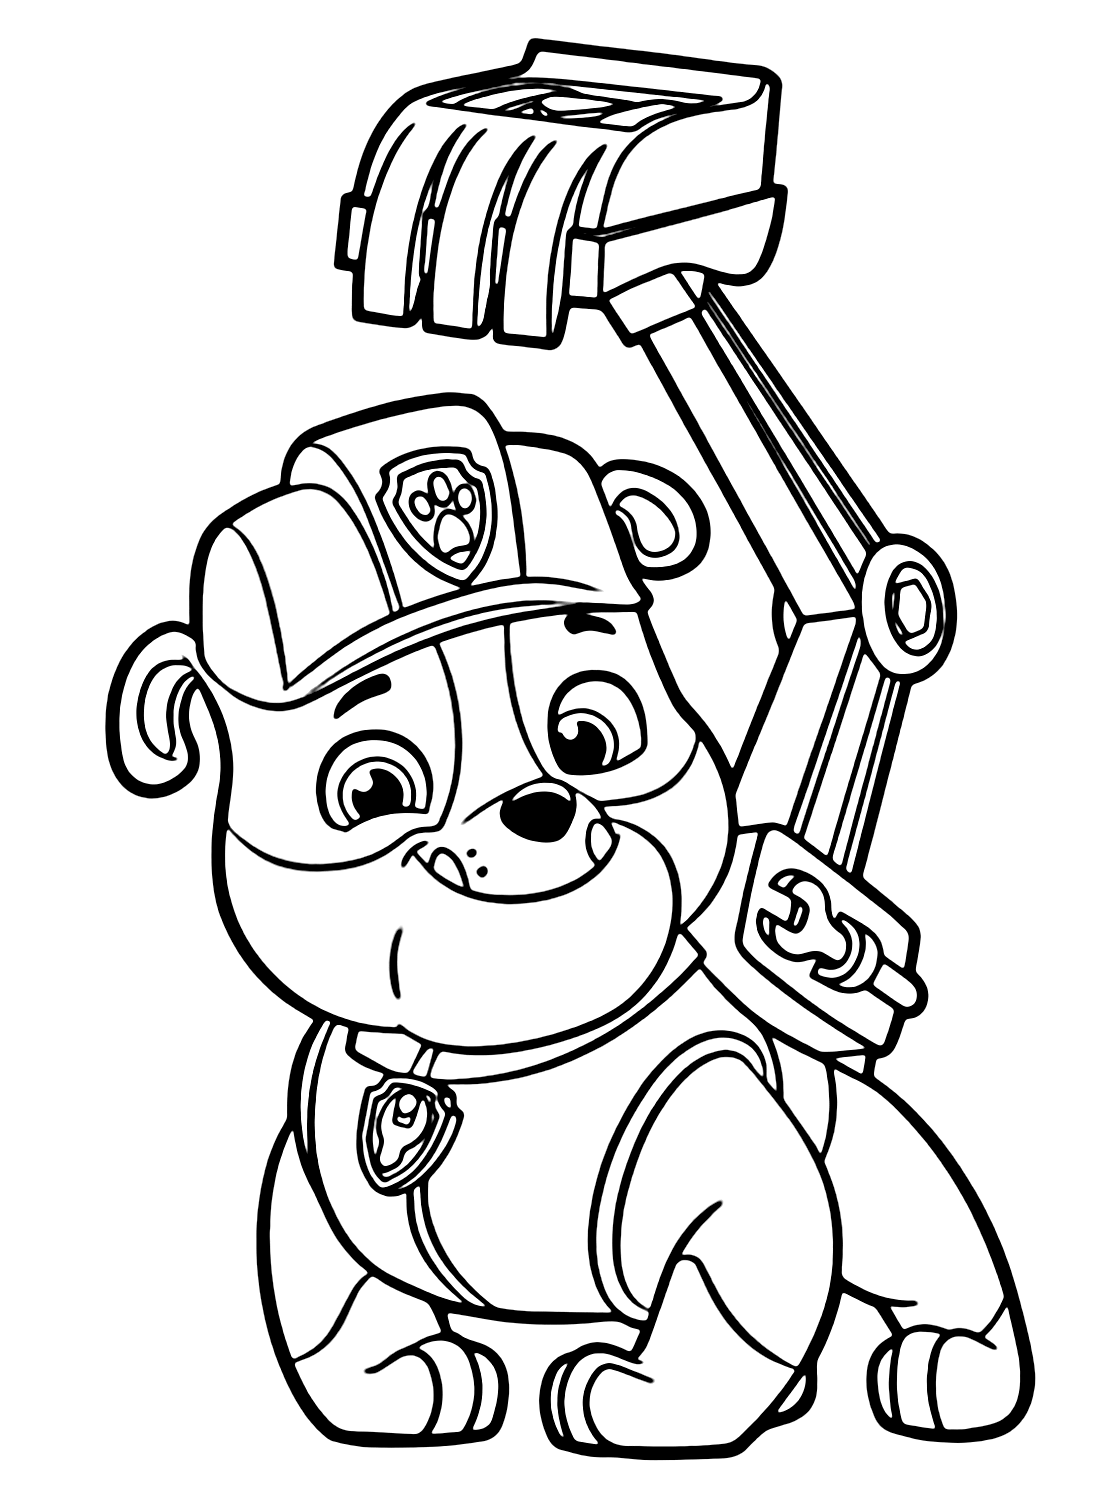 Rubble in Paw Patrol Coloring Pages